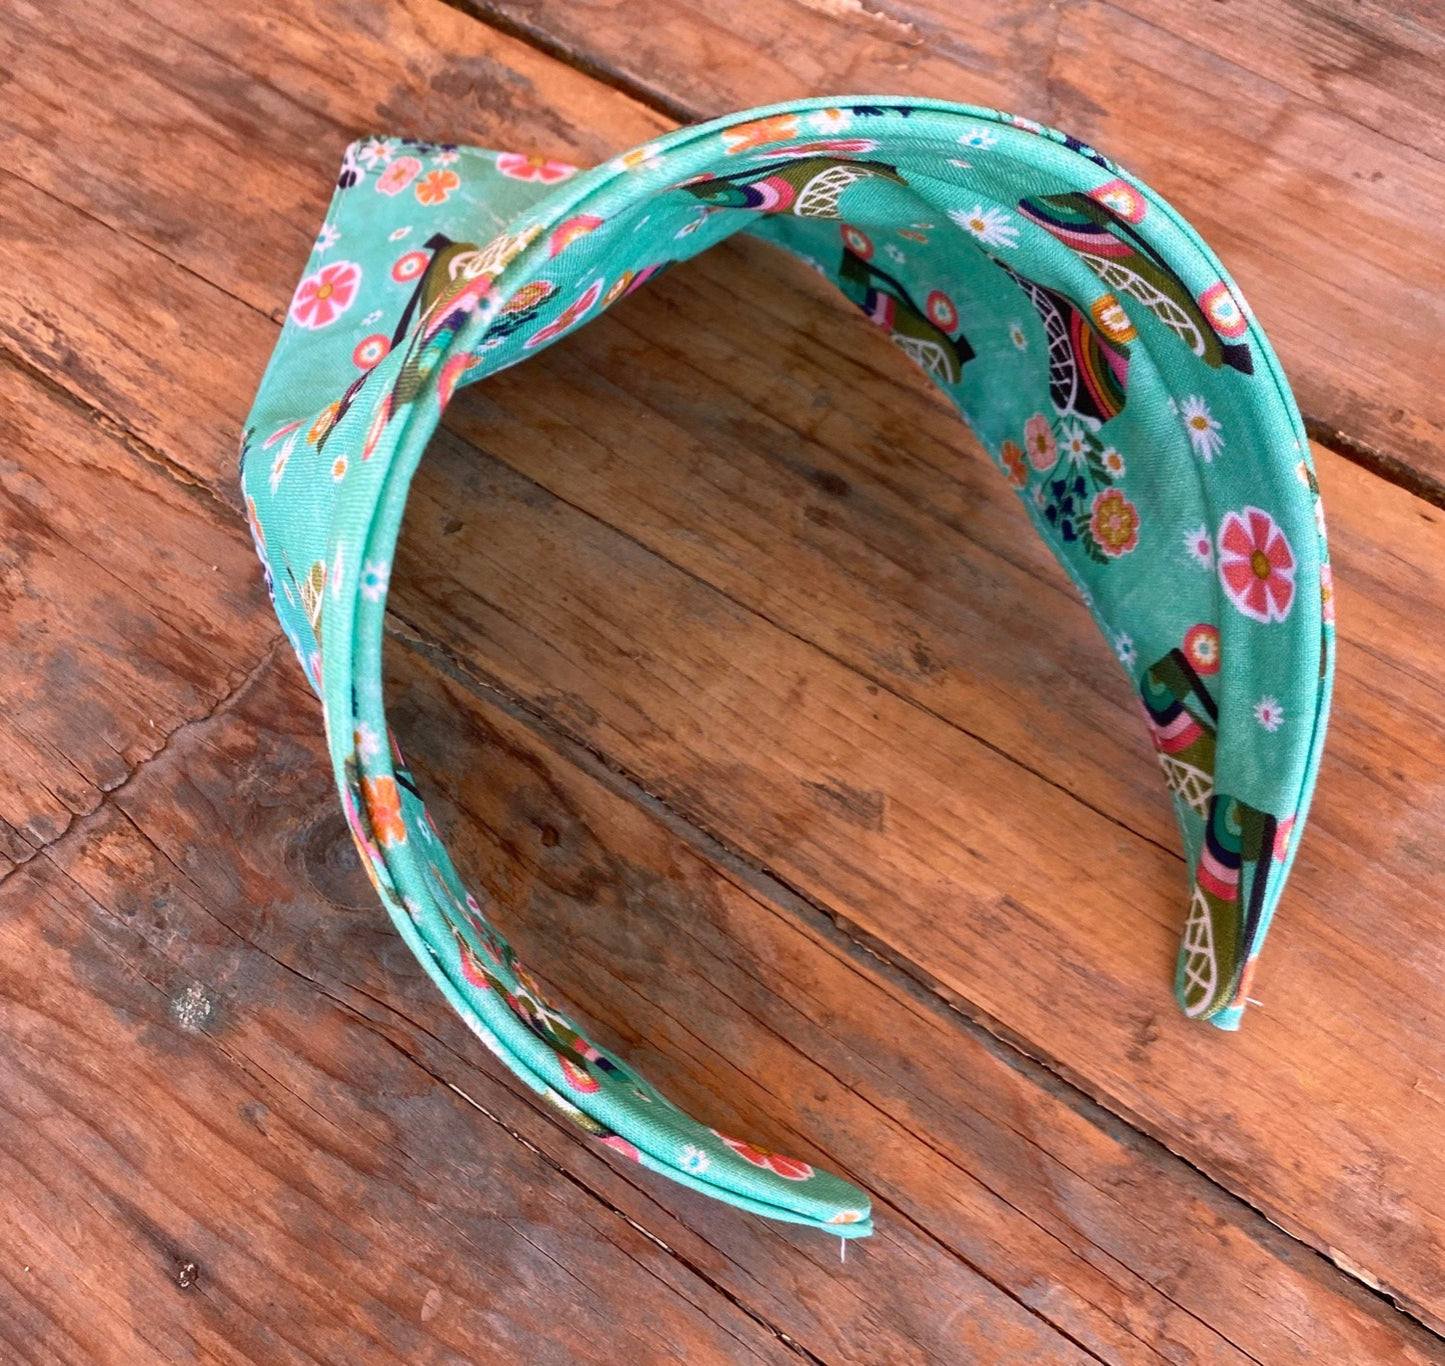 triangle head scarf attached to a headband. features a roller skating print.